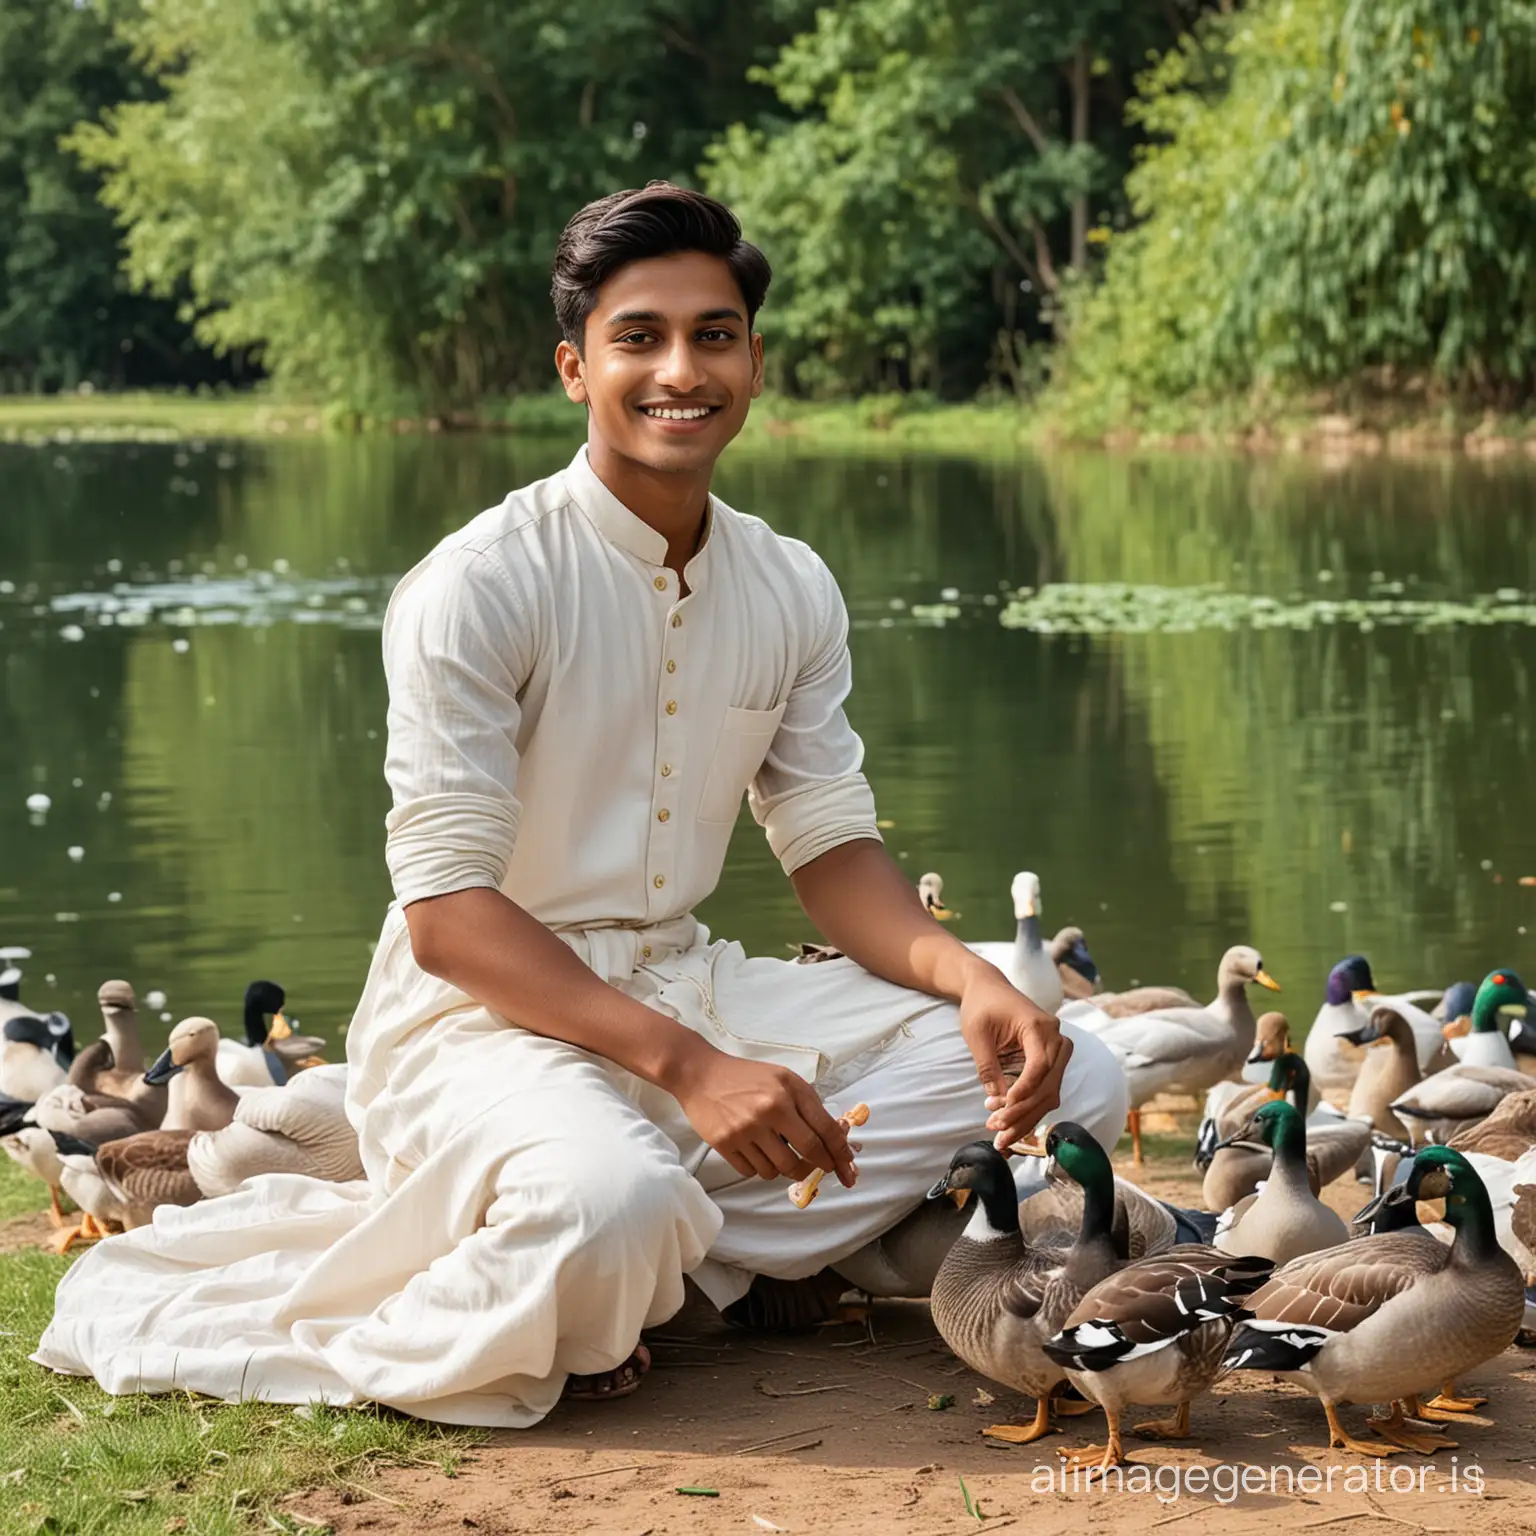 A 26 year old indian boy well dressed is sitting near a clean lake and feeding ducks. he is able to see there is 24 year old girl coming towards him in a white dress smiling
